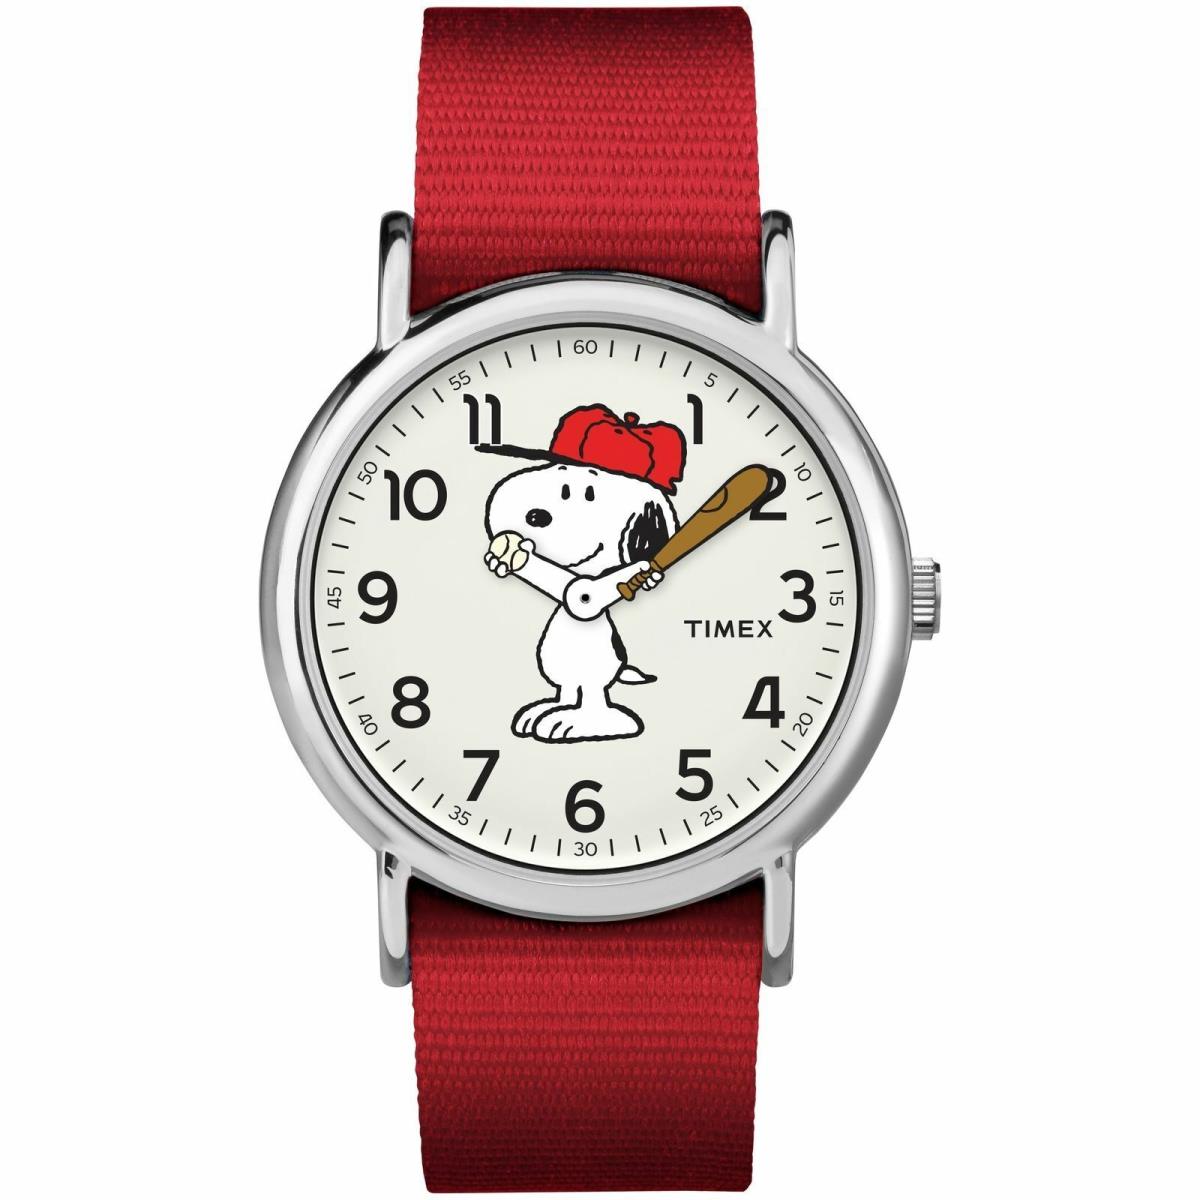 Timex TW2R41400 Peanuts-snoopy Weekender Red Slip Thru Fabric Watch - Dial: White, Band: Red, Bezel: Silver